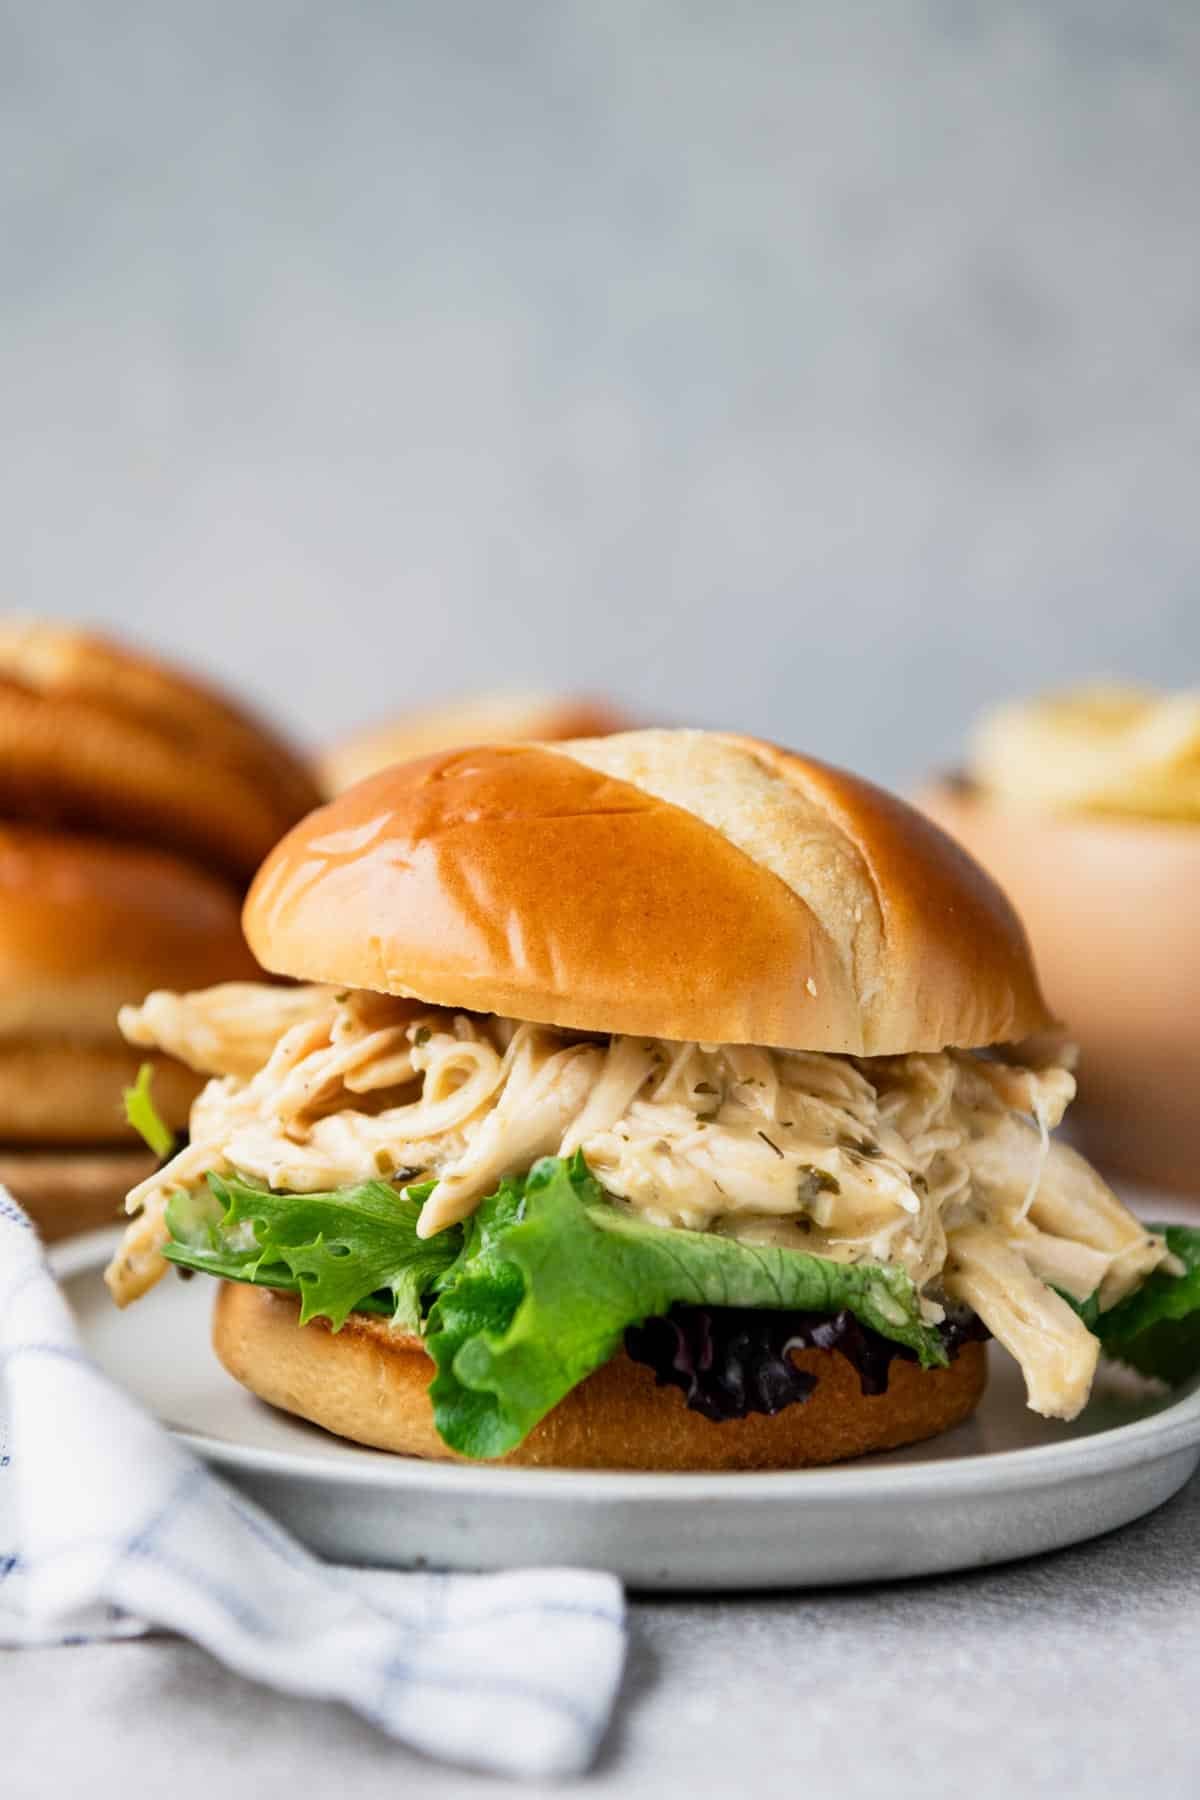 Shredded ranch chicken crock pot recipe served on a brioche bun with chips in the background.